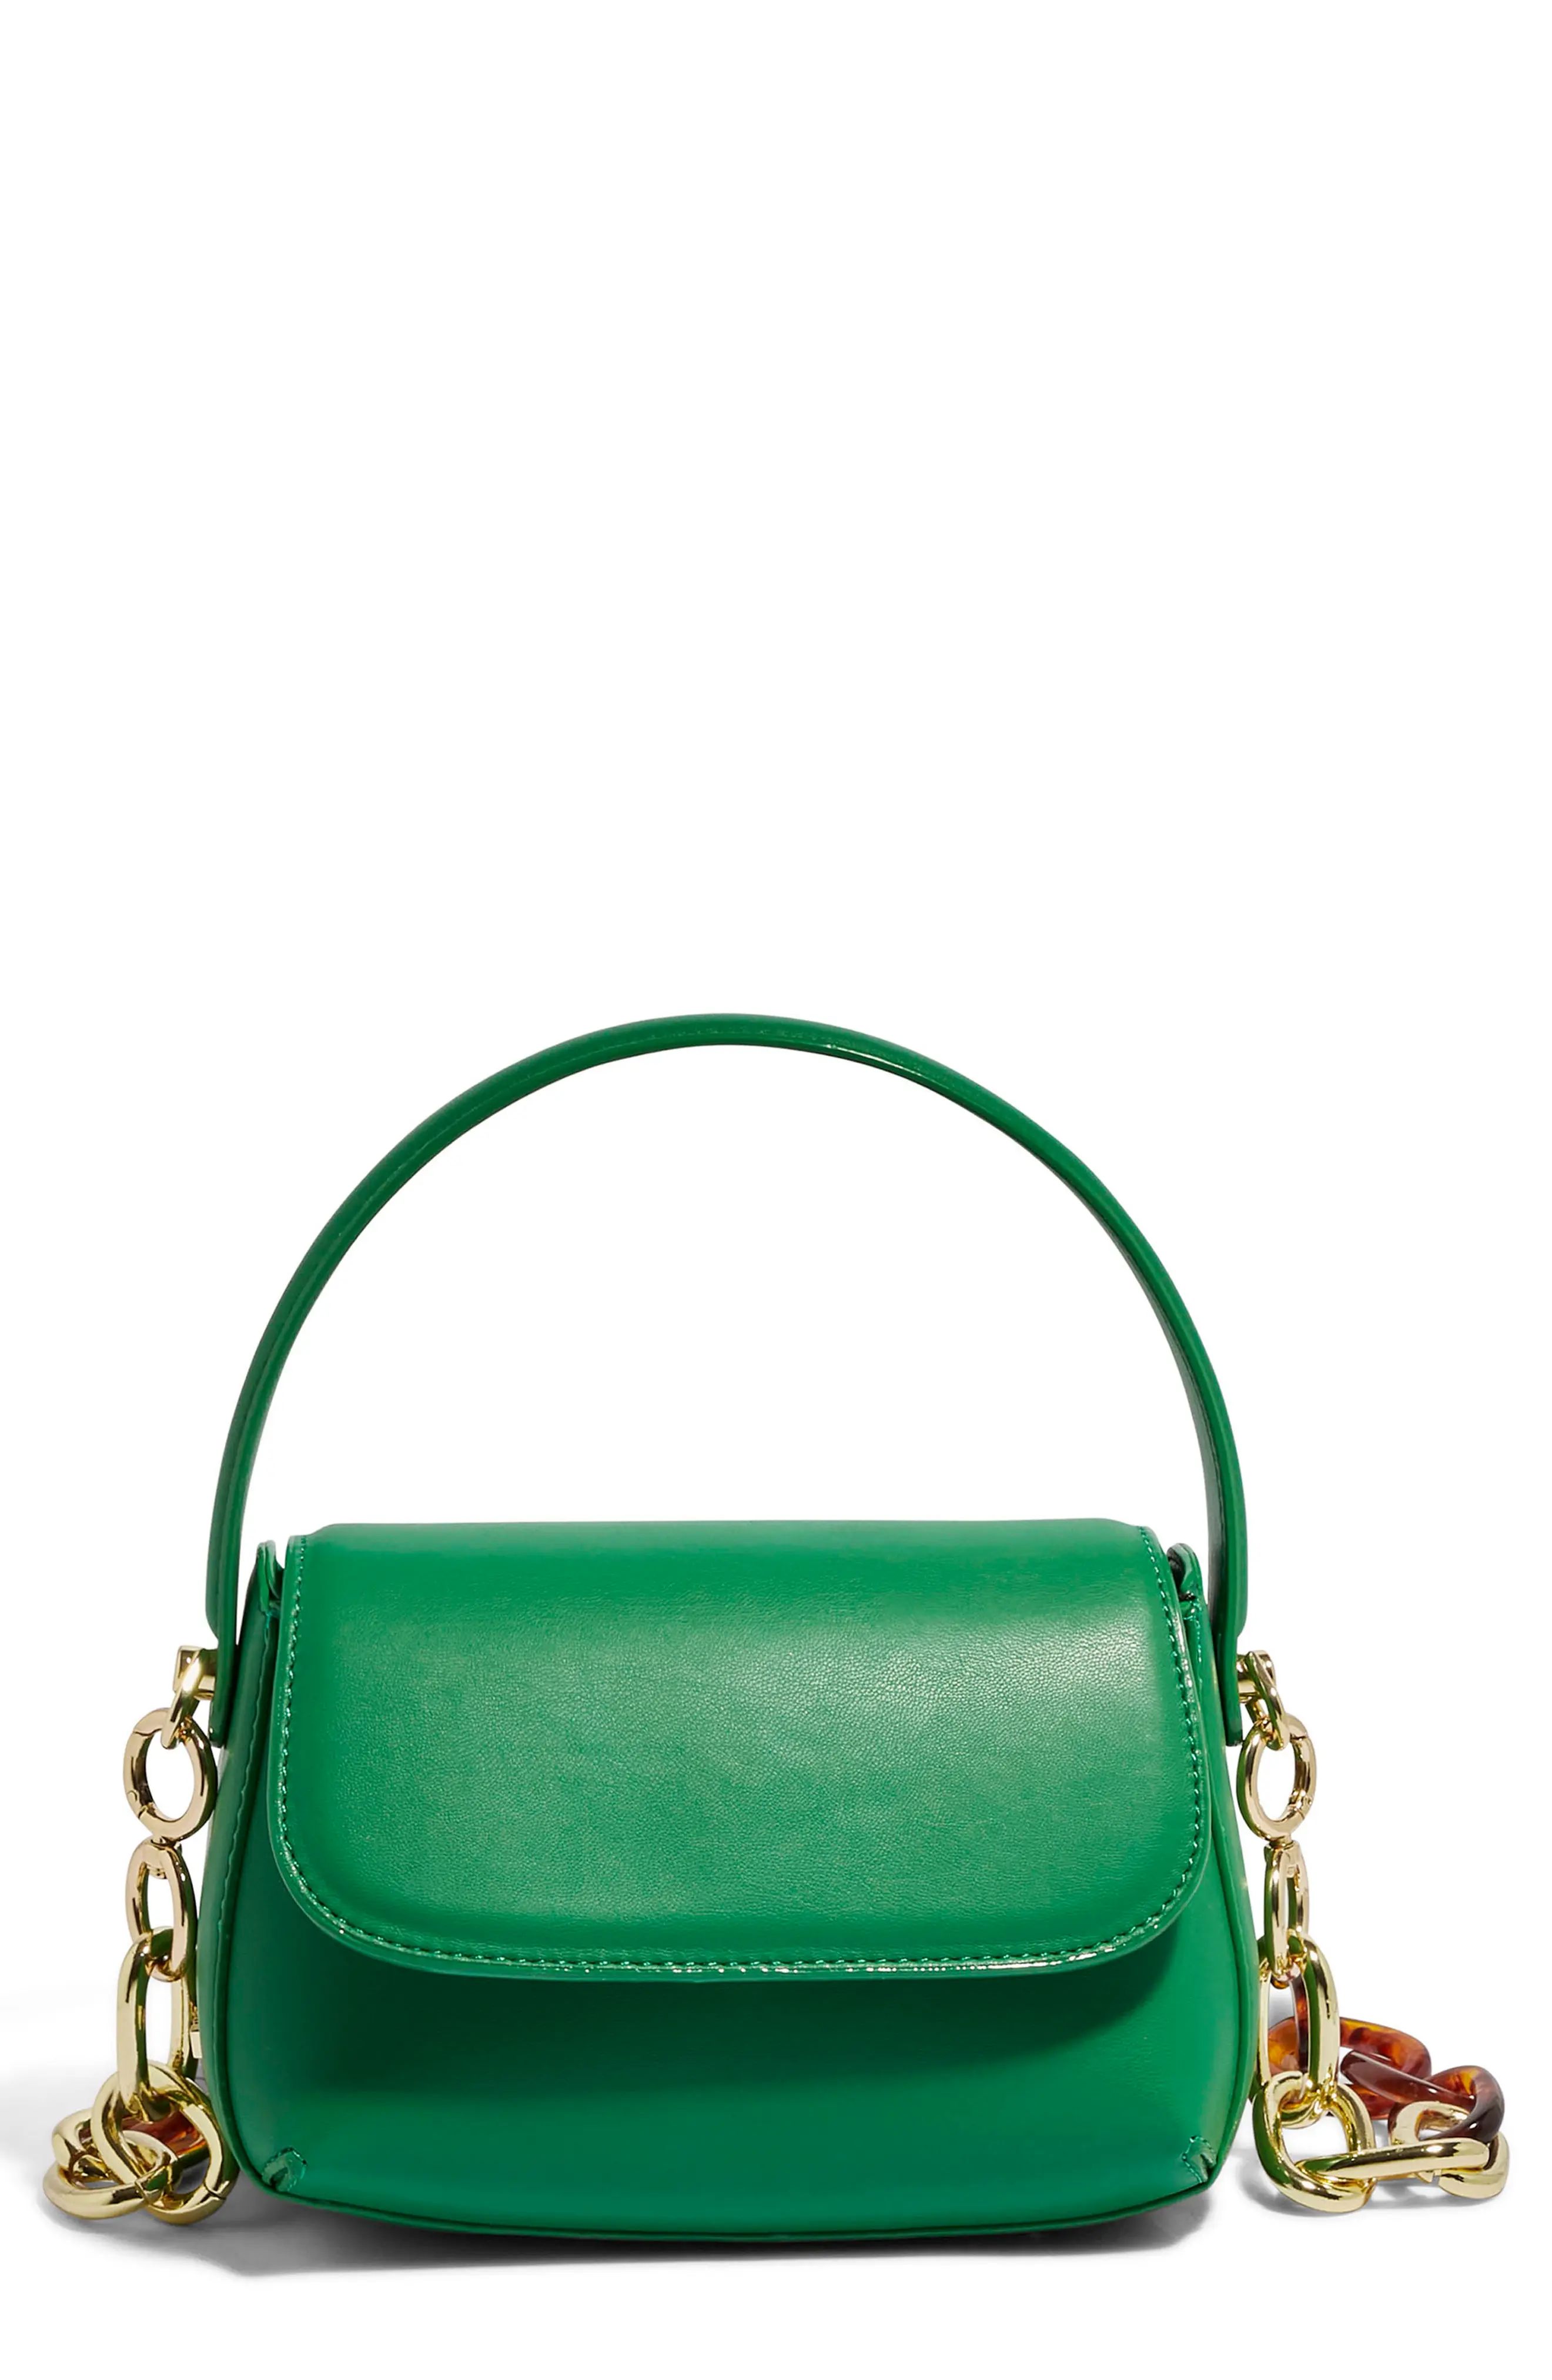 HOUSE OF WANT We Are Chic Vegan Leather Crossbody Bag in Green at Nordstrom | Nordstrom